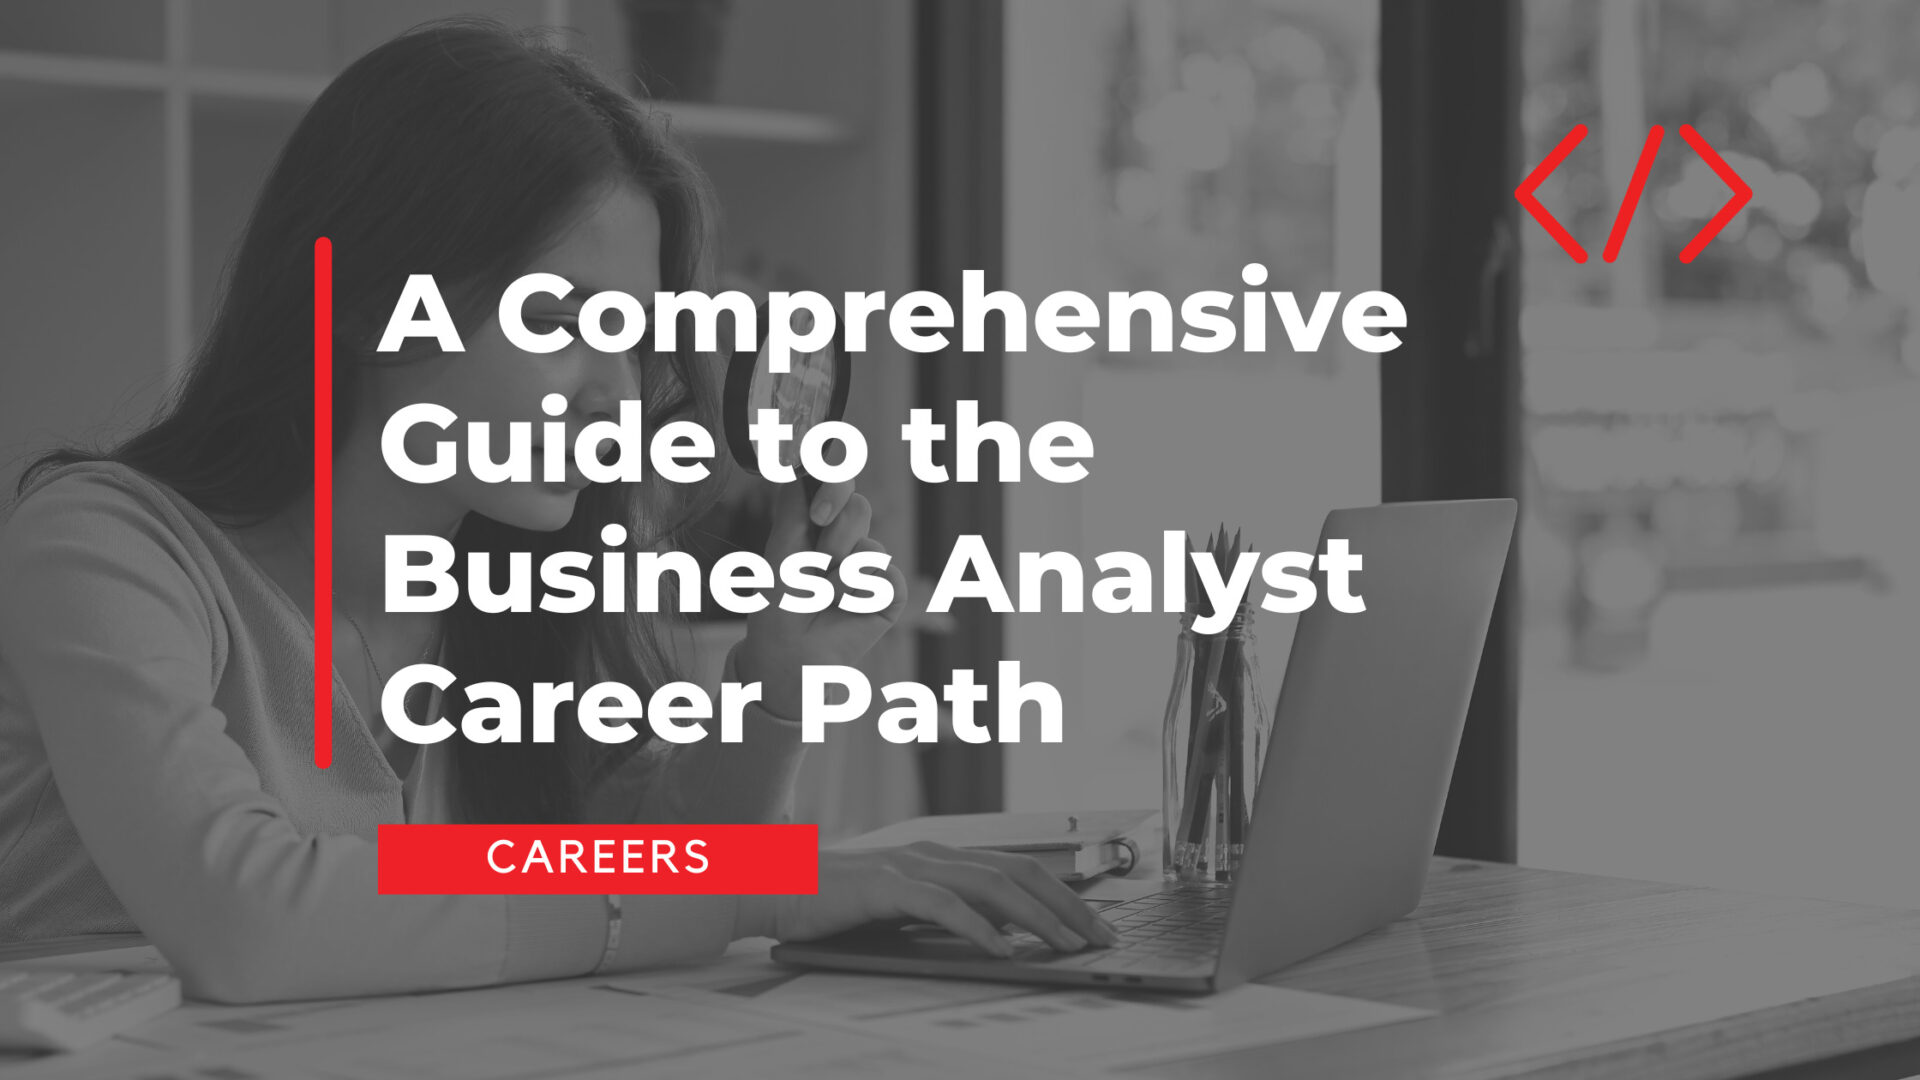 A Comprehensive Guide to the Business Analyst Career Path